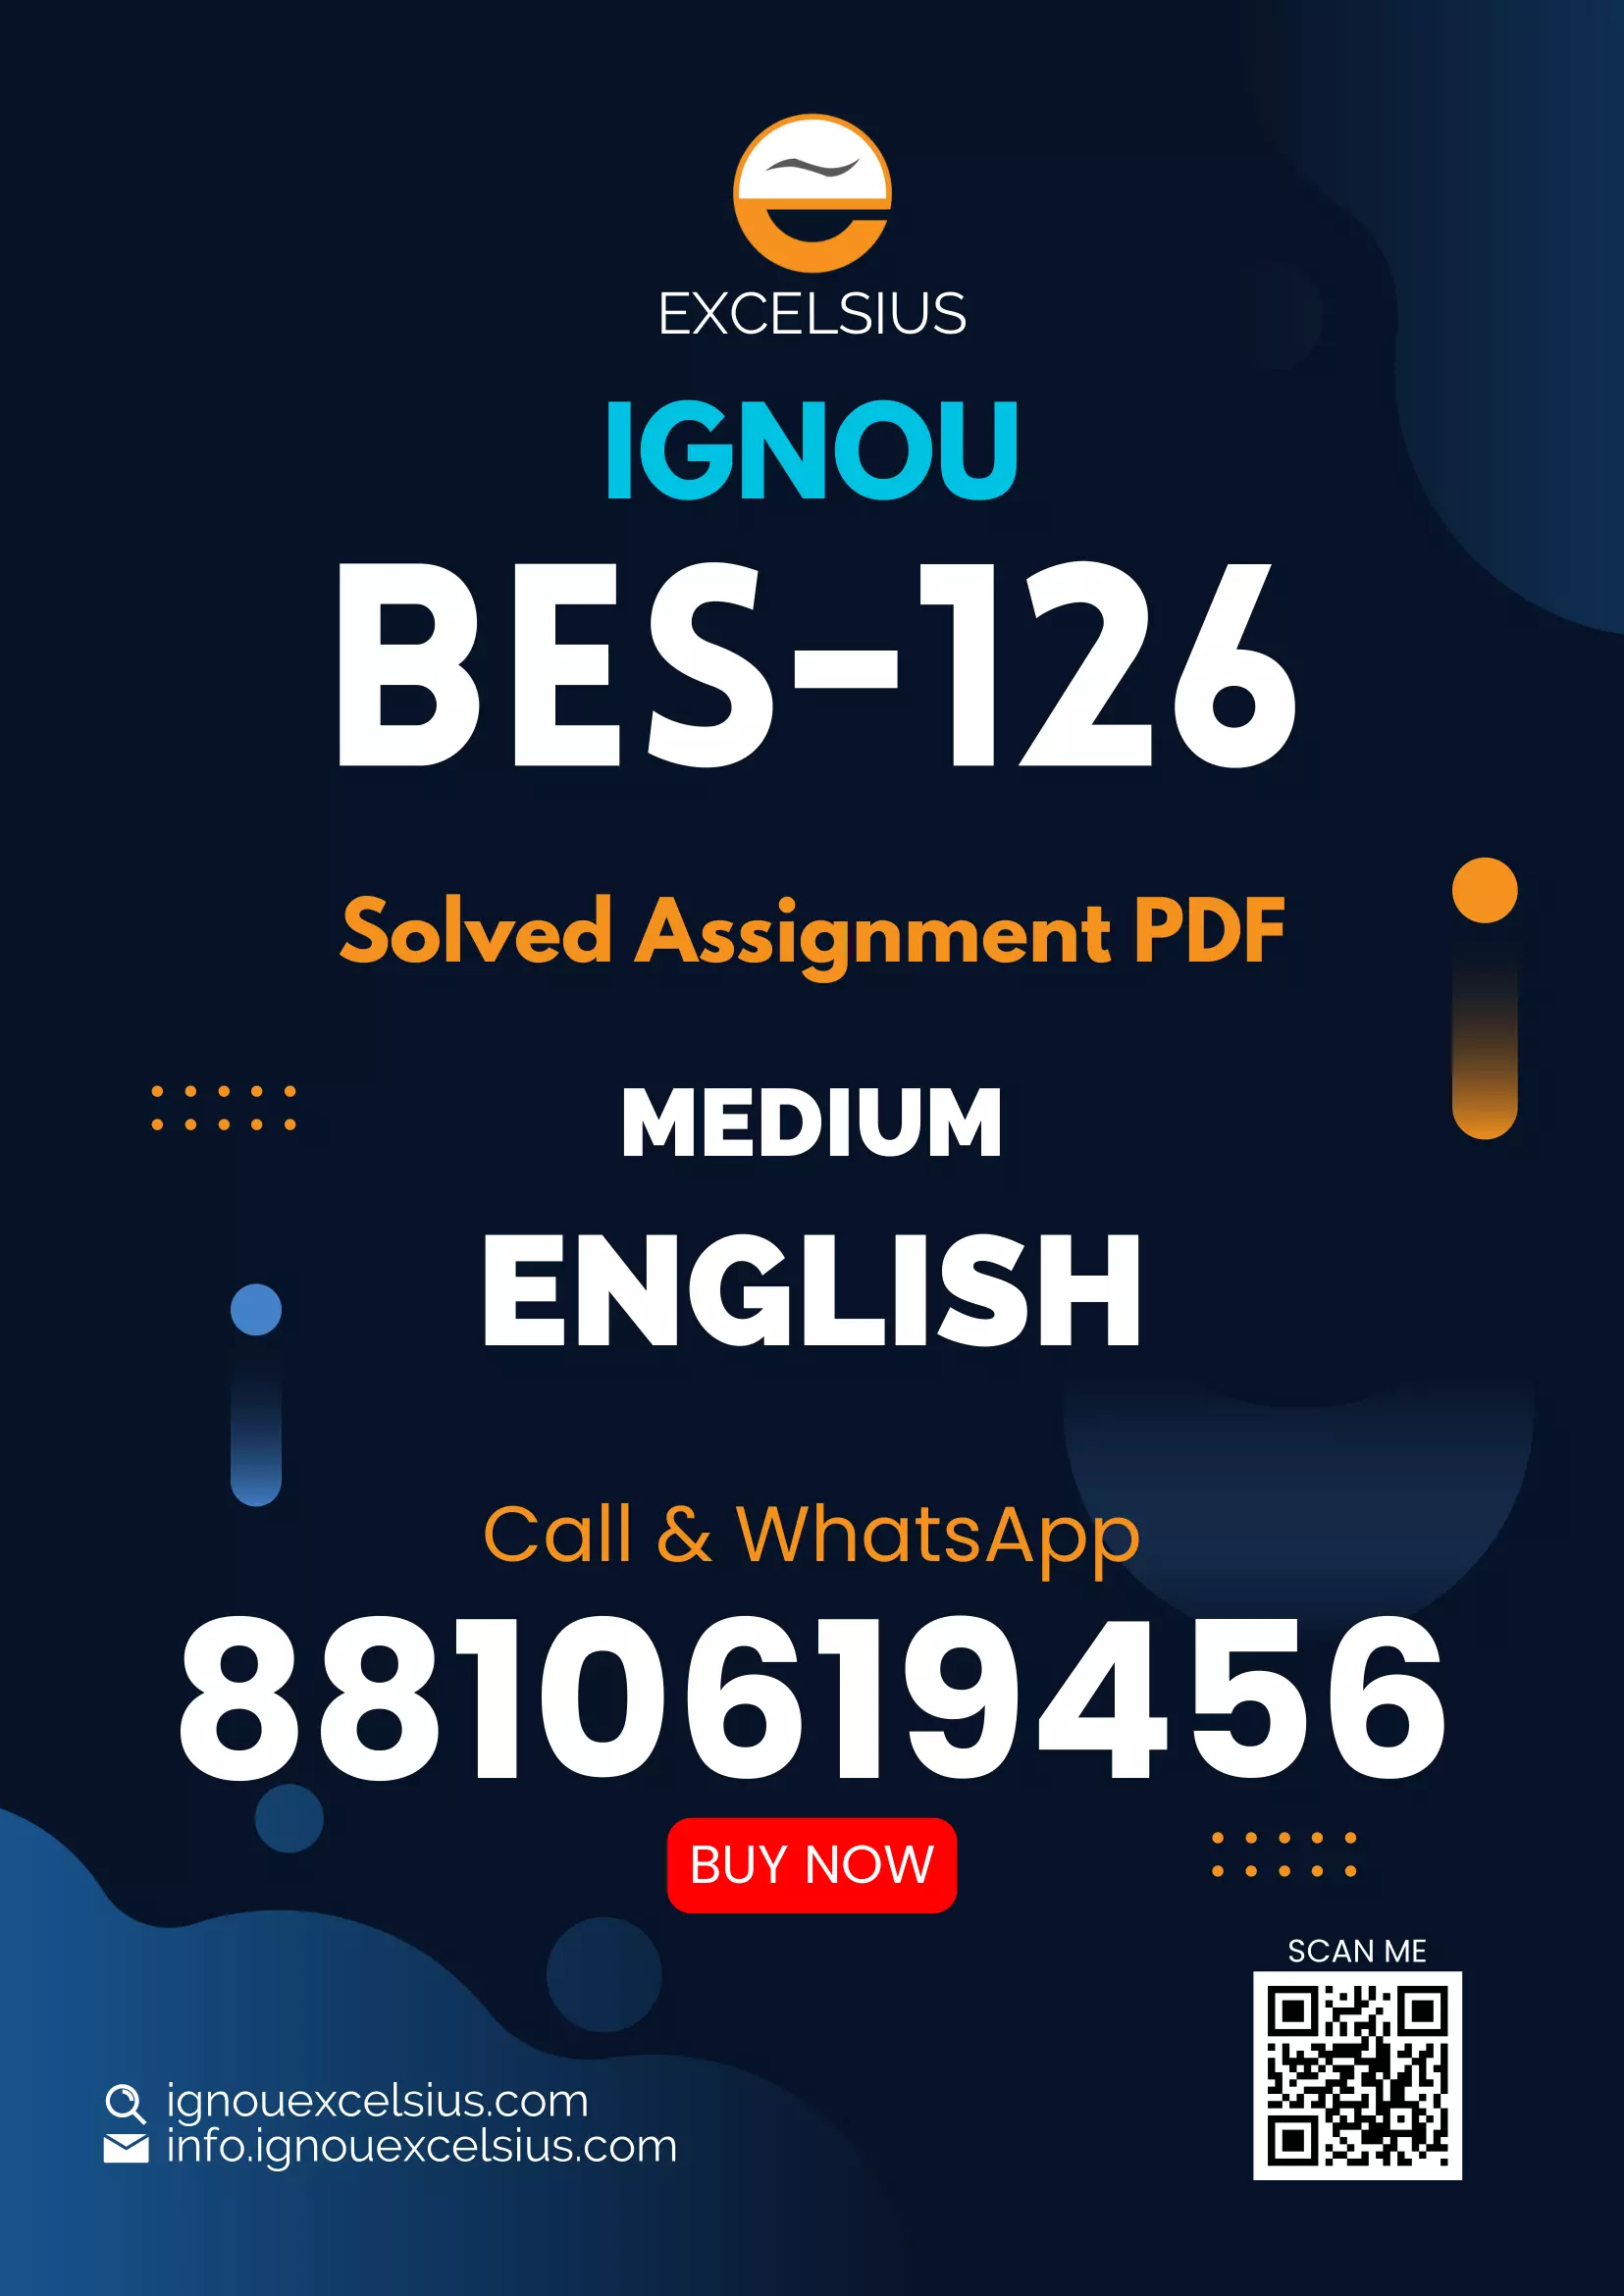 IGNOU BES-126 - Knowledge and Curriculum, Latest Solved Assignment-January 2021 - July 2021